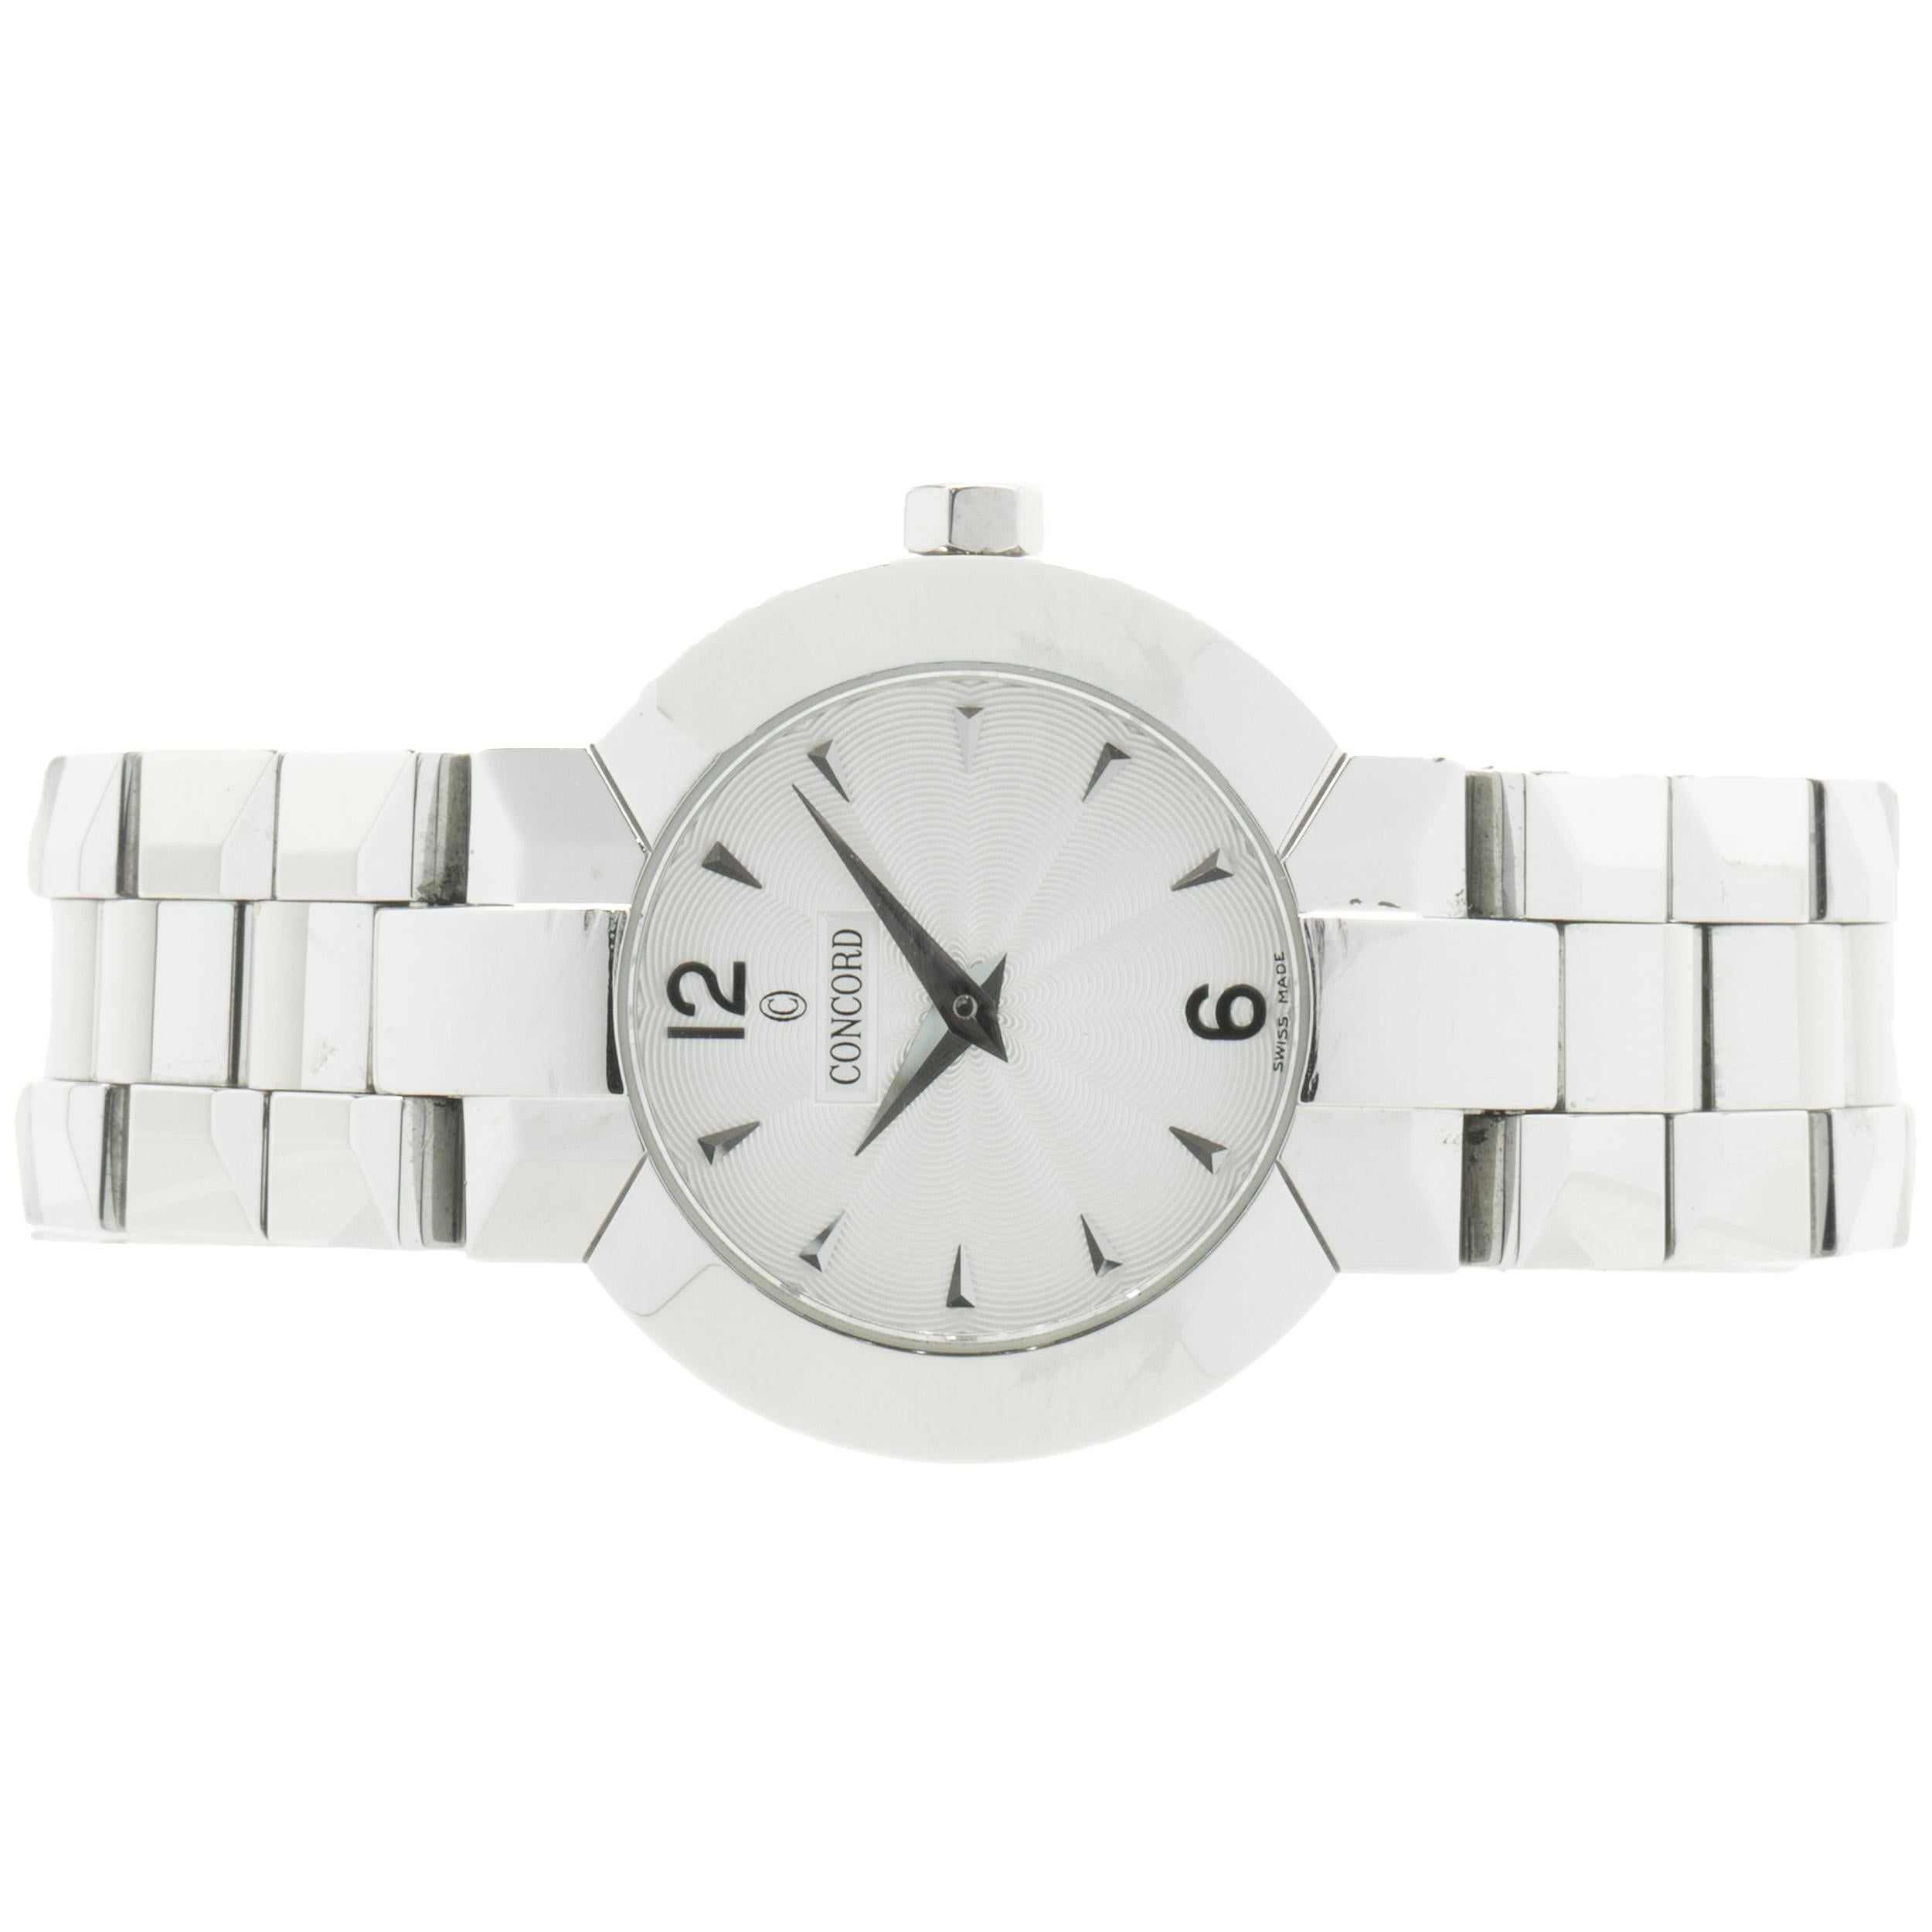 Movement: quartz
Function: hours, minutes
Case: 26mm round case, smooth bezel, sapphire crystal, pull/push crown, water resistant
Dial: silver stick
Band: Concord stainless steel bracelet, integrated clasp
Serial#: 1331XXX
Reference #: